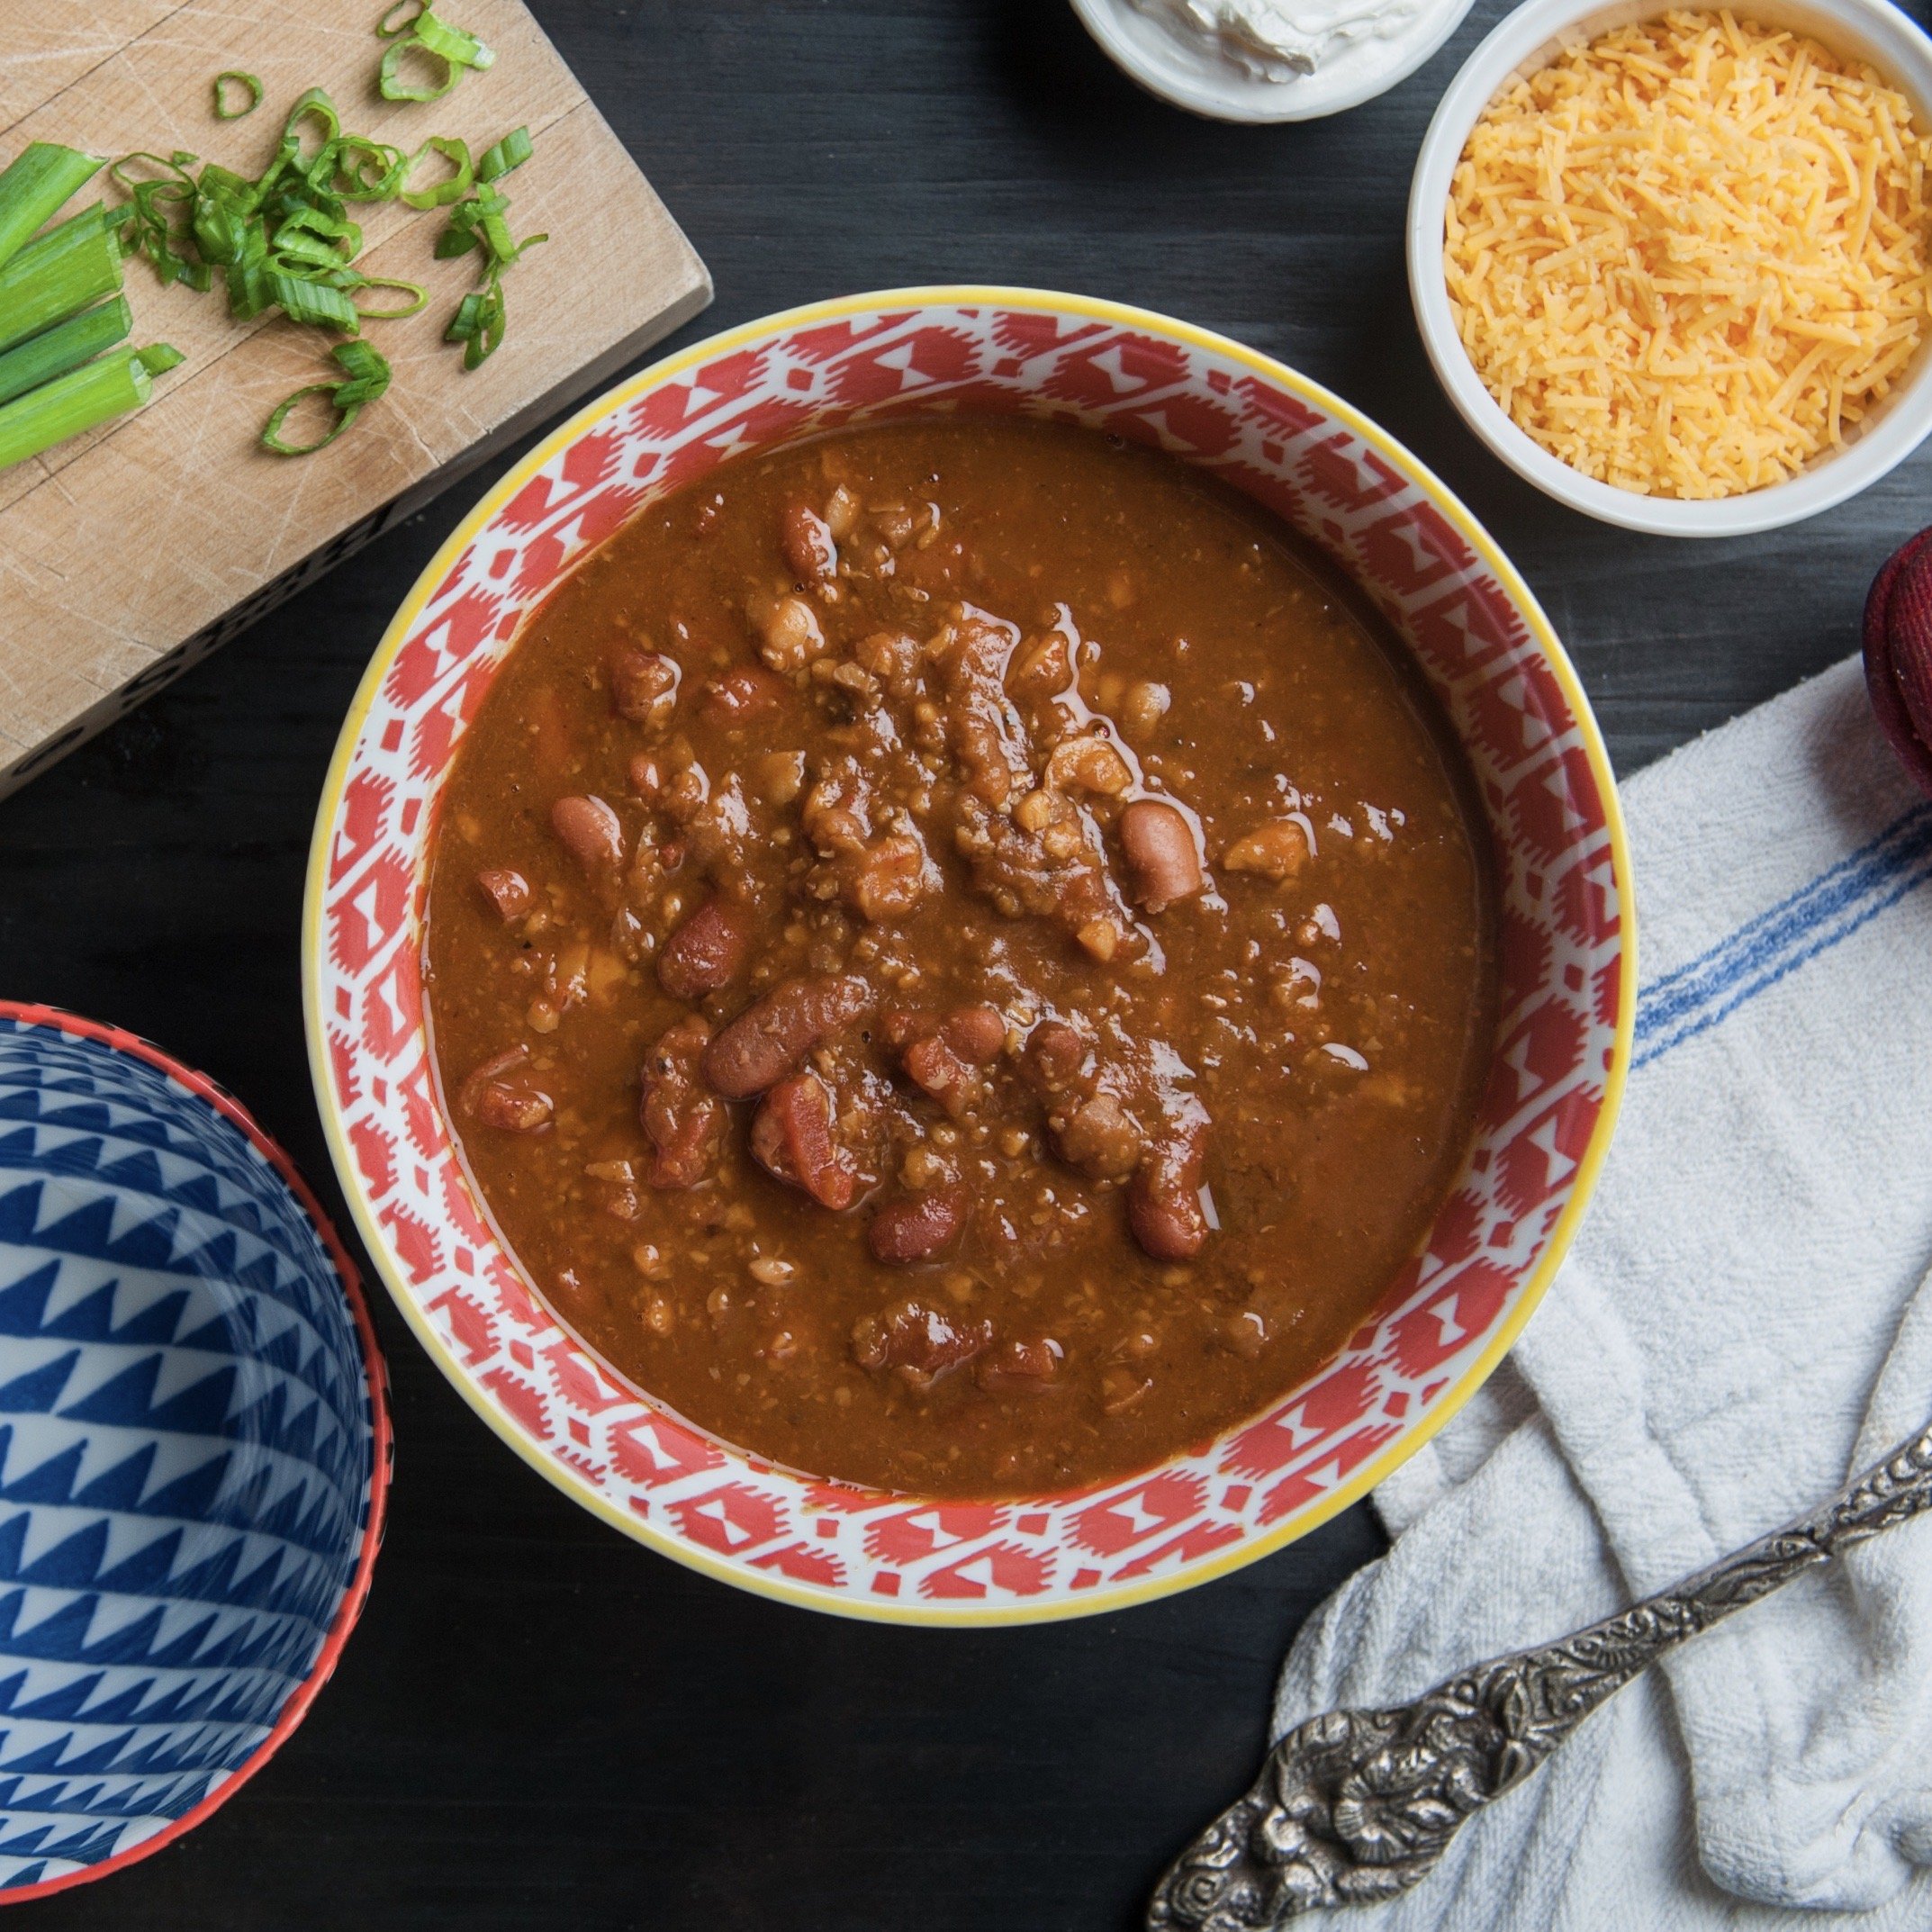 Image of Red Bean & Chickpea Chili